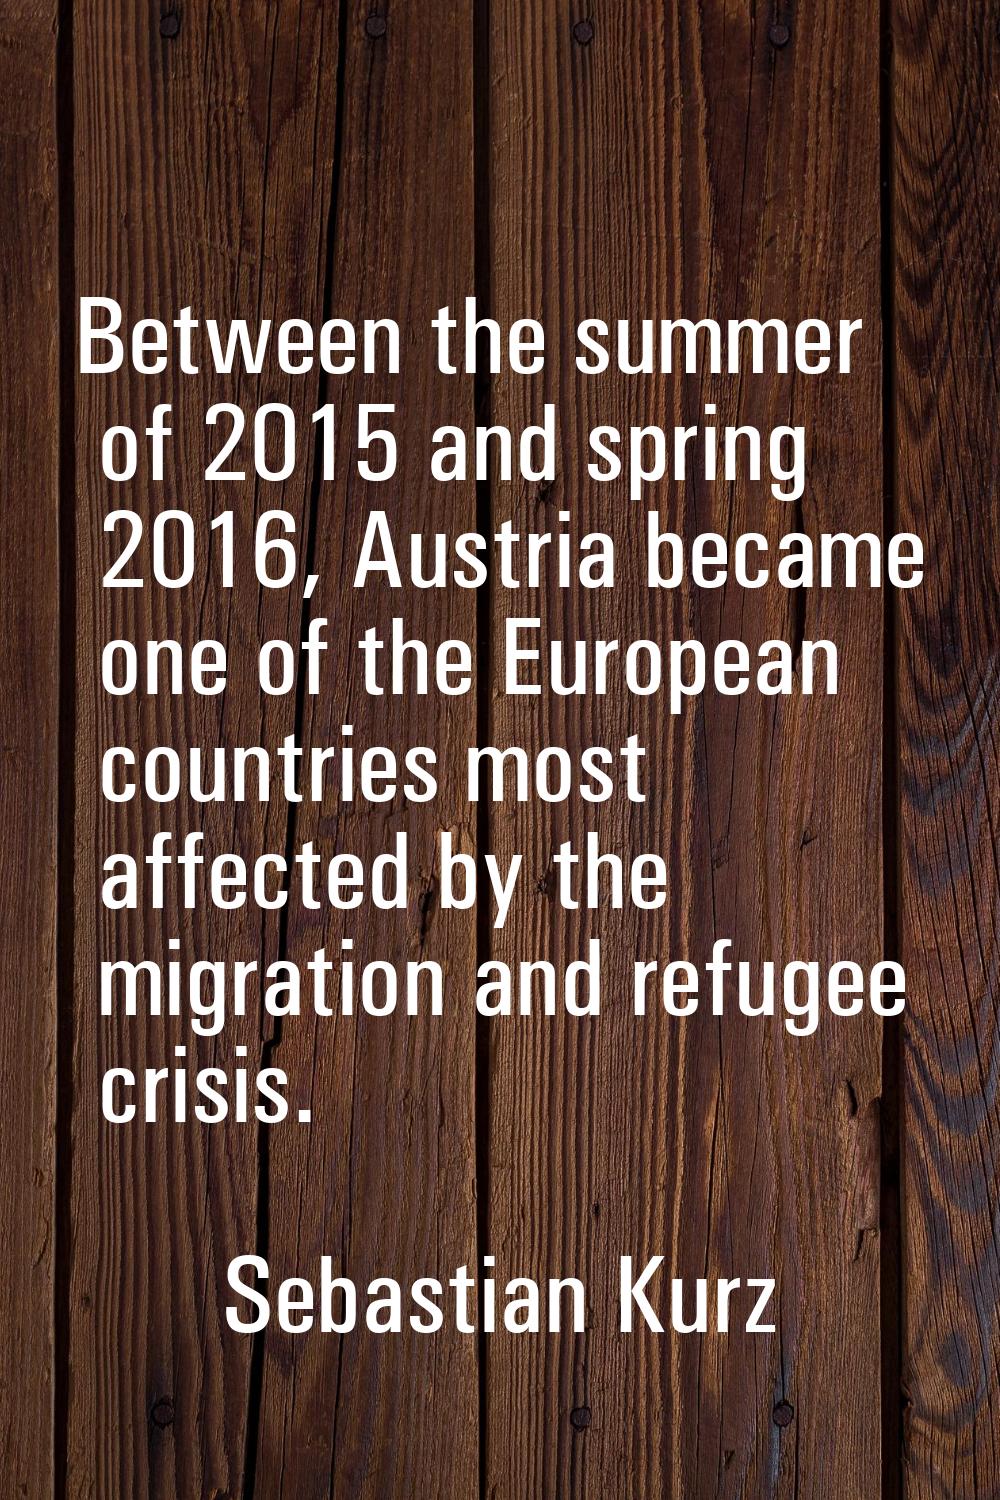 Between the summer of 2015 and spring 2016, Austria became one of the European countries most affec